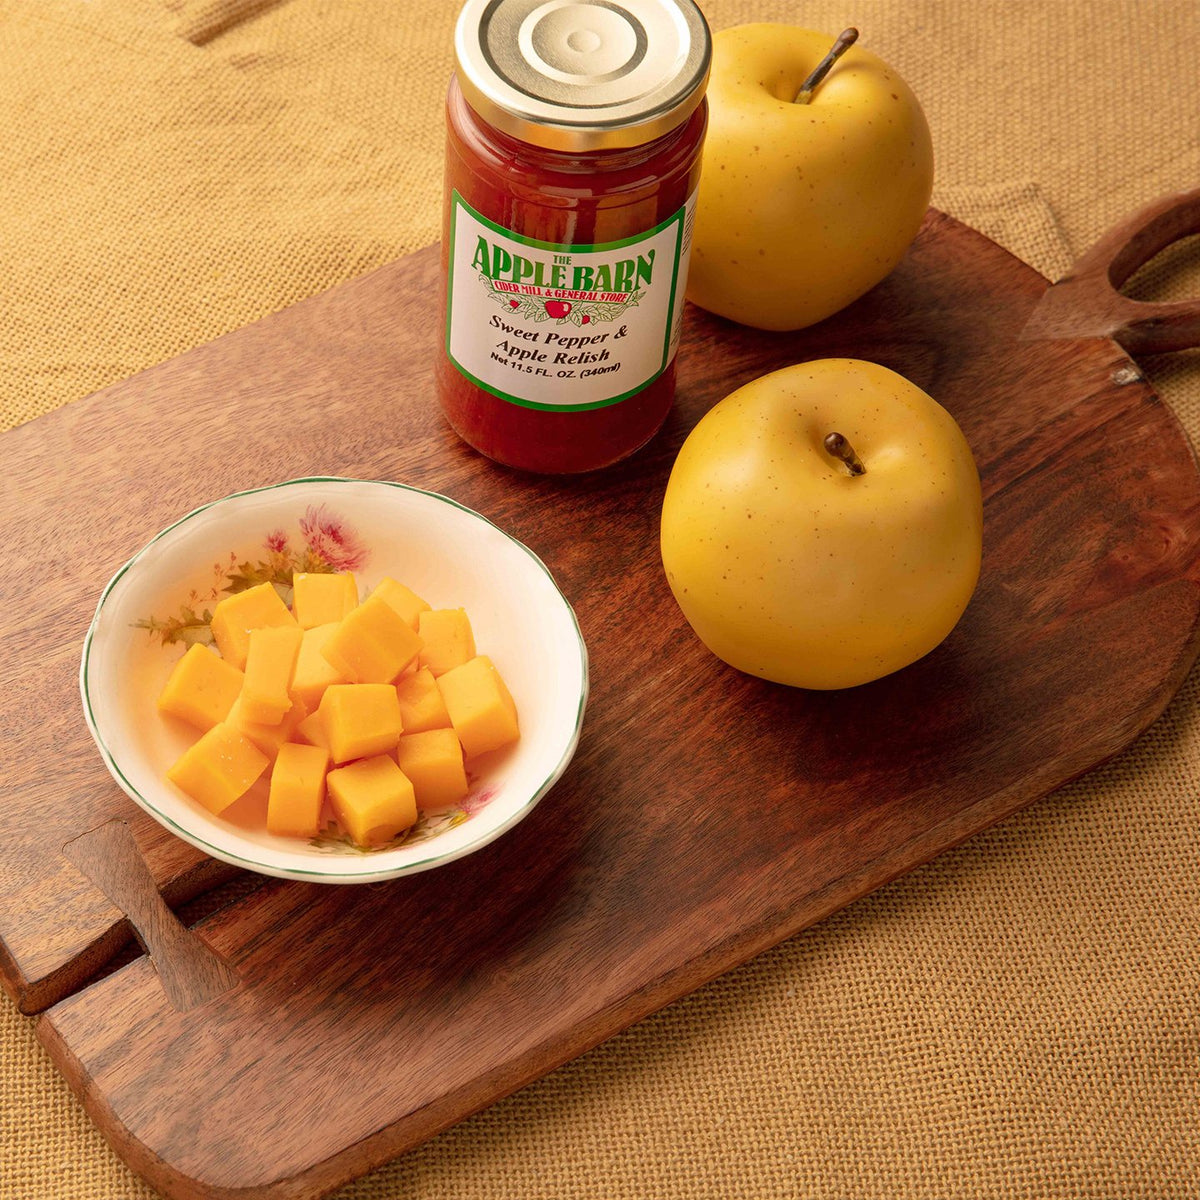 Sweet pepper and apple relish with cheese and apples